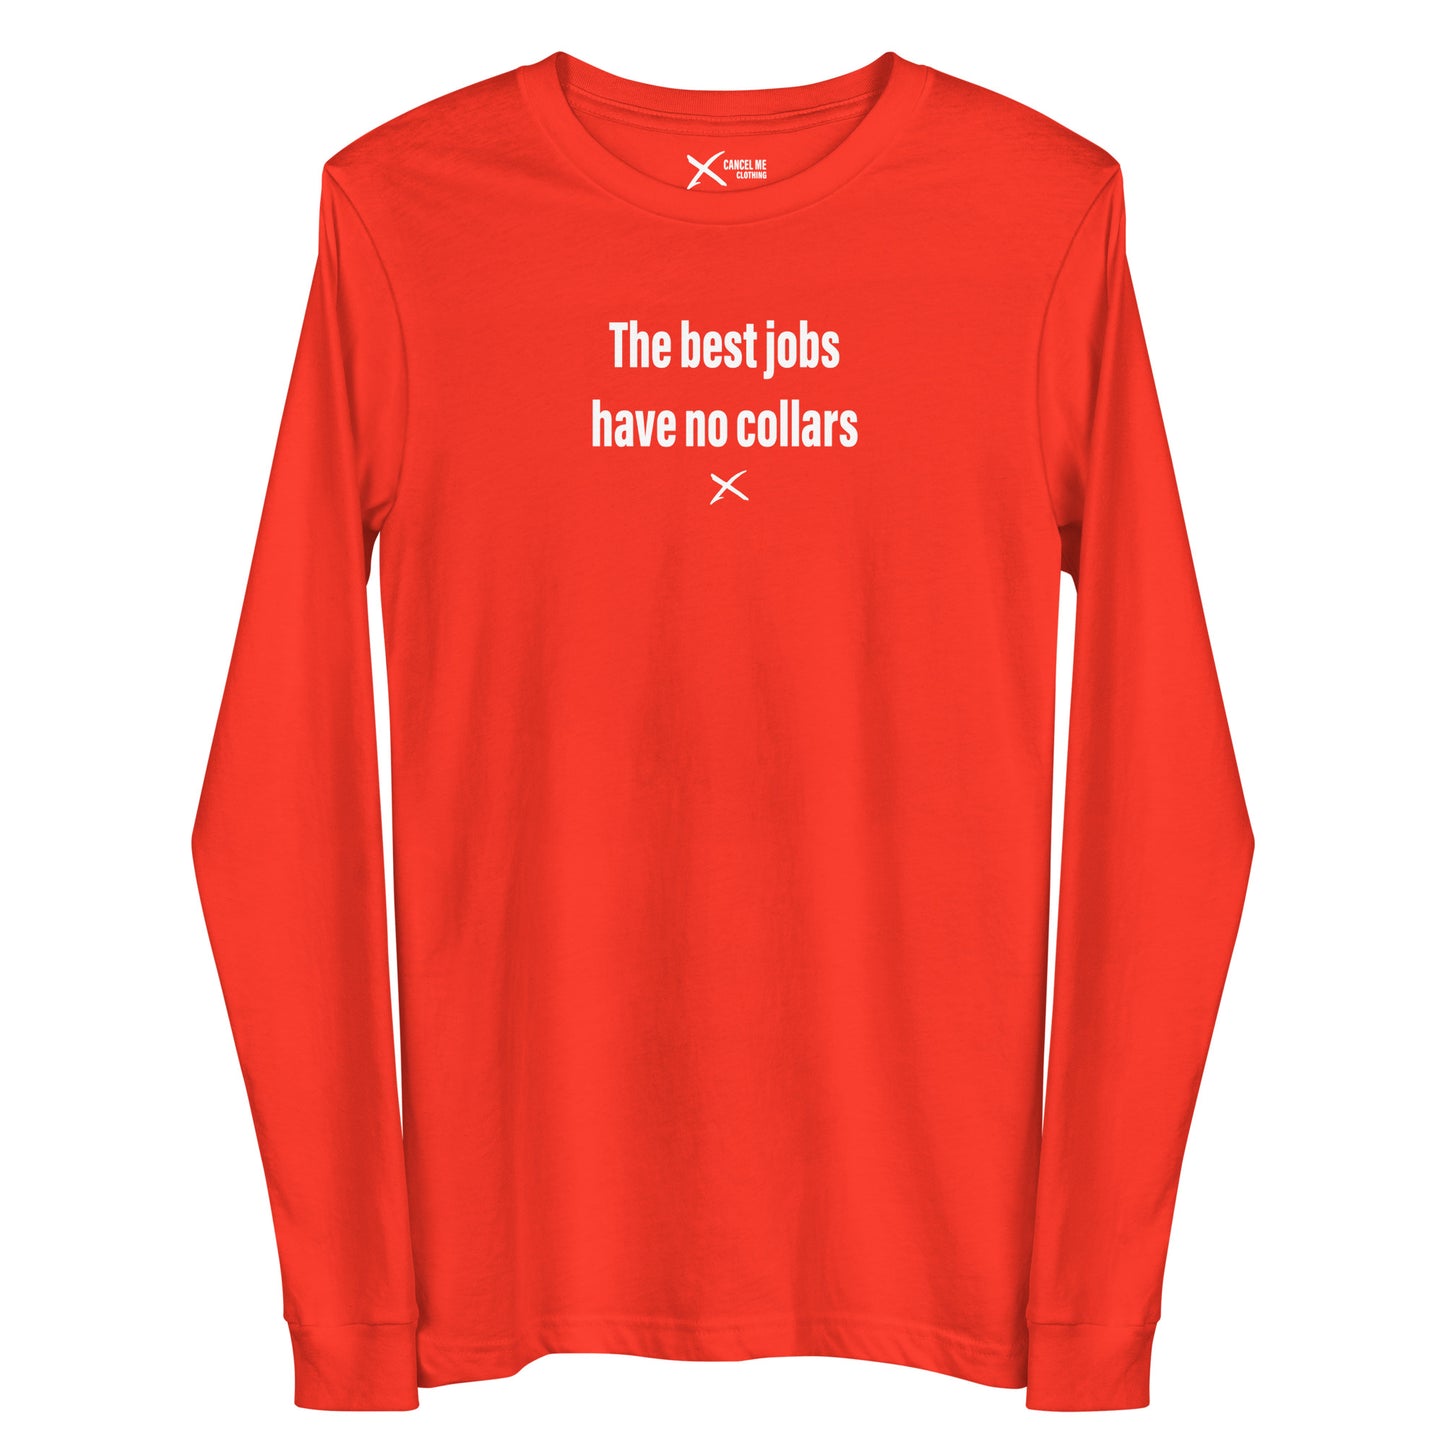 The best jobs have no collars - Longsleeve